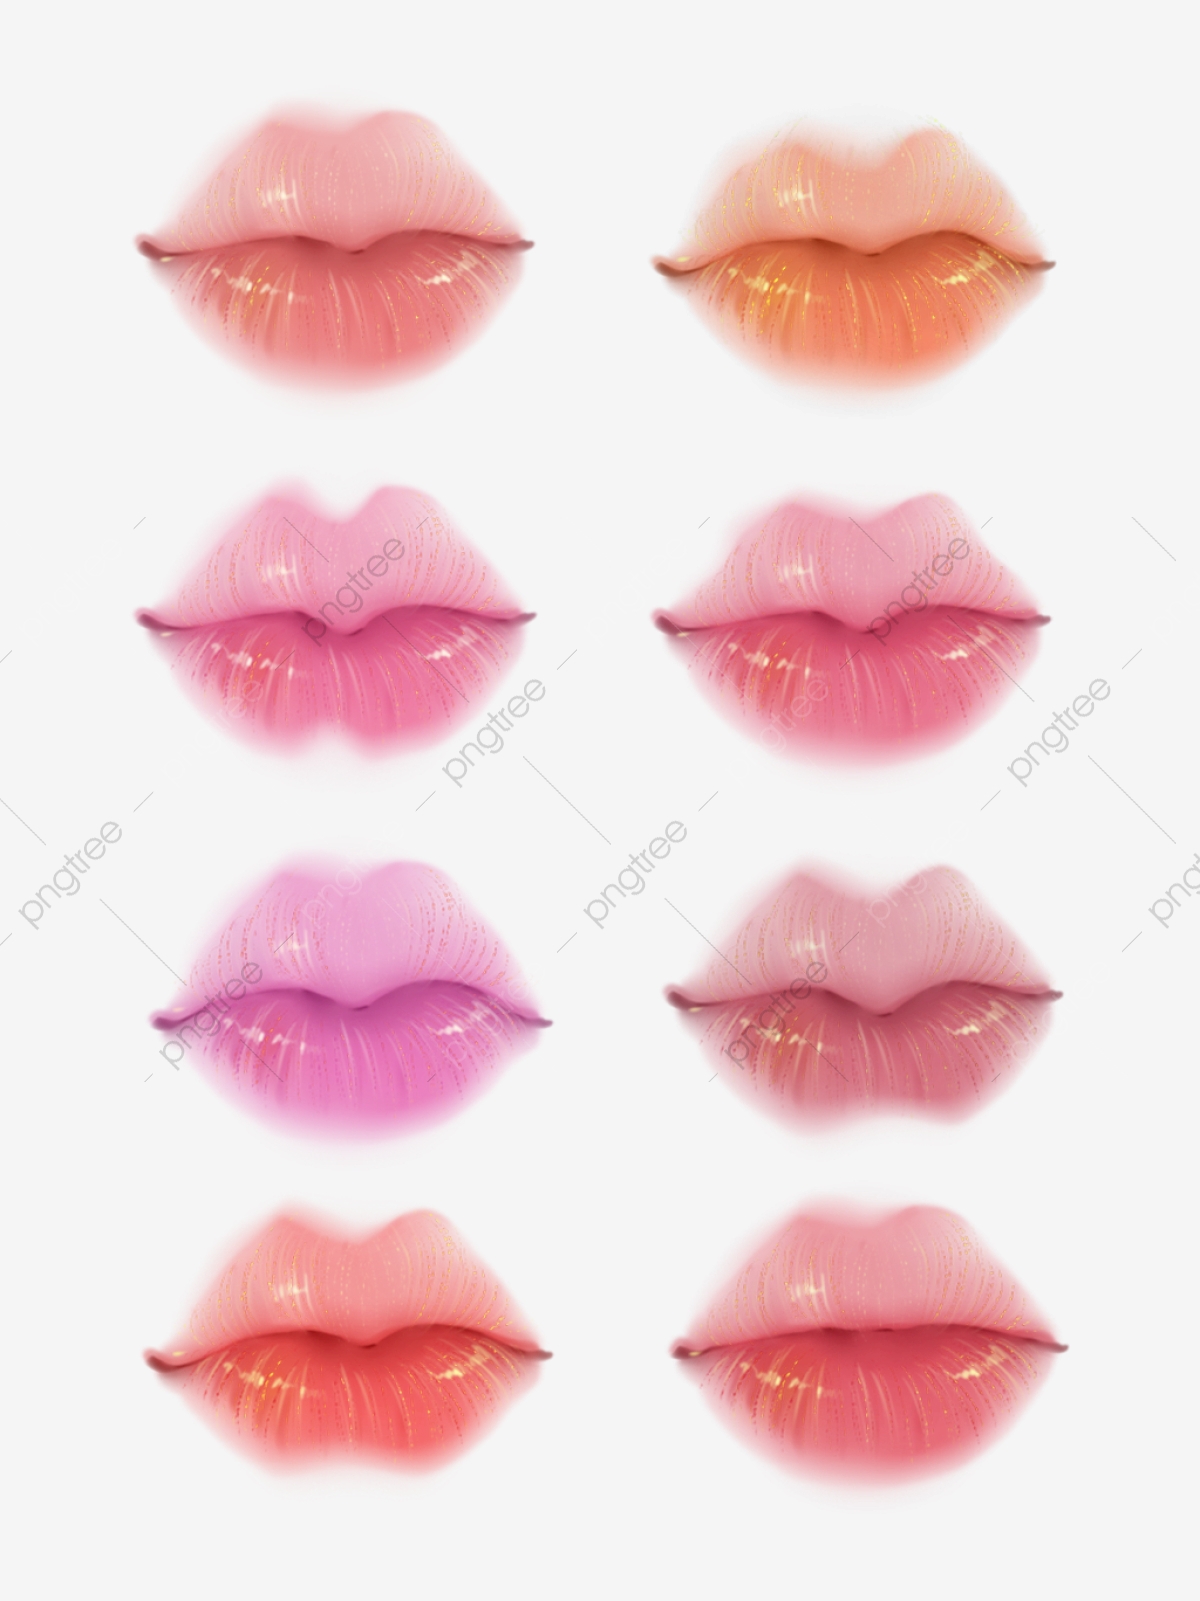 Hand Painted Characters Five Senses Lips Fashion Painting Makeup Set.